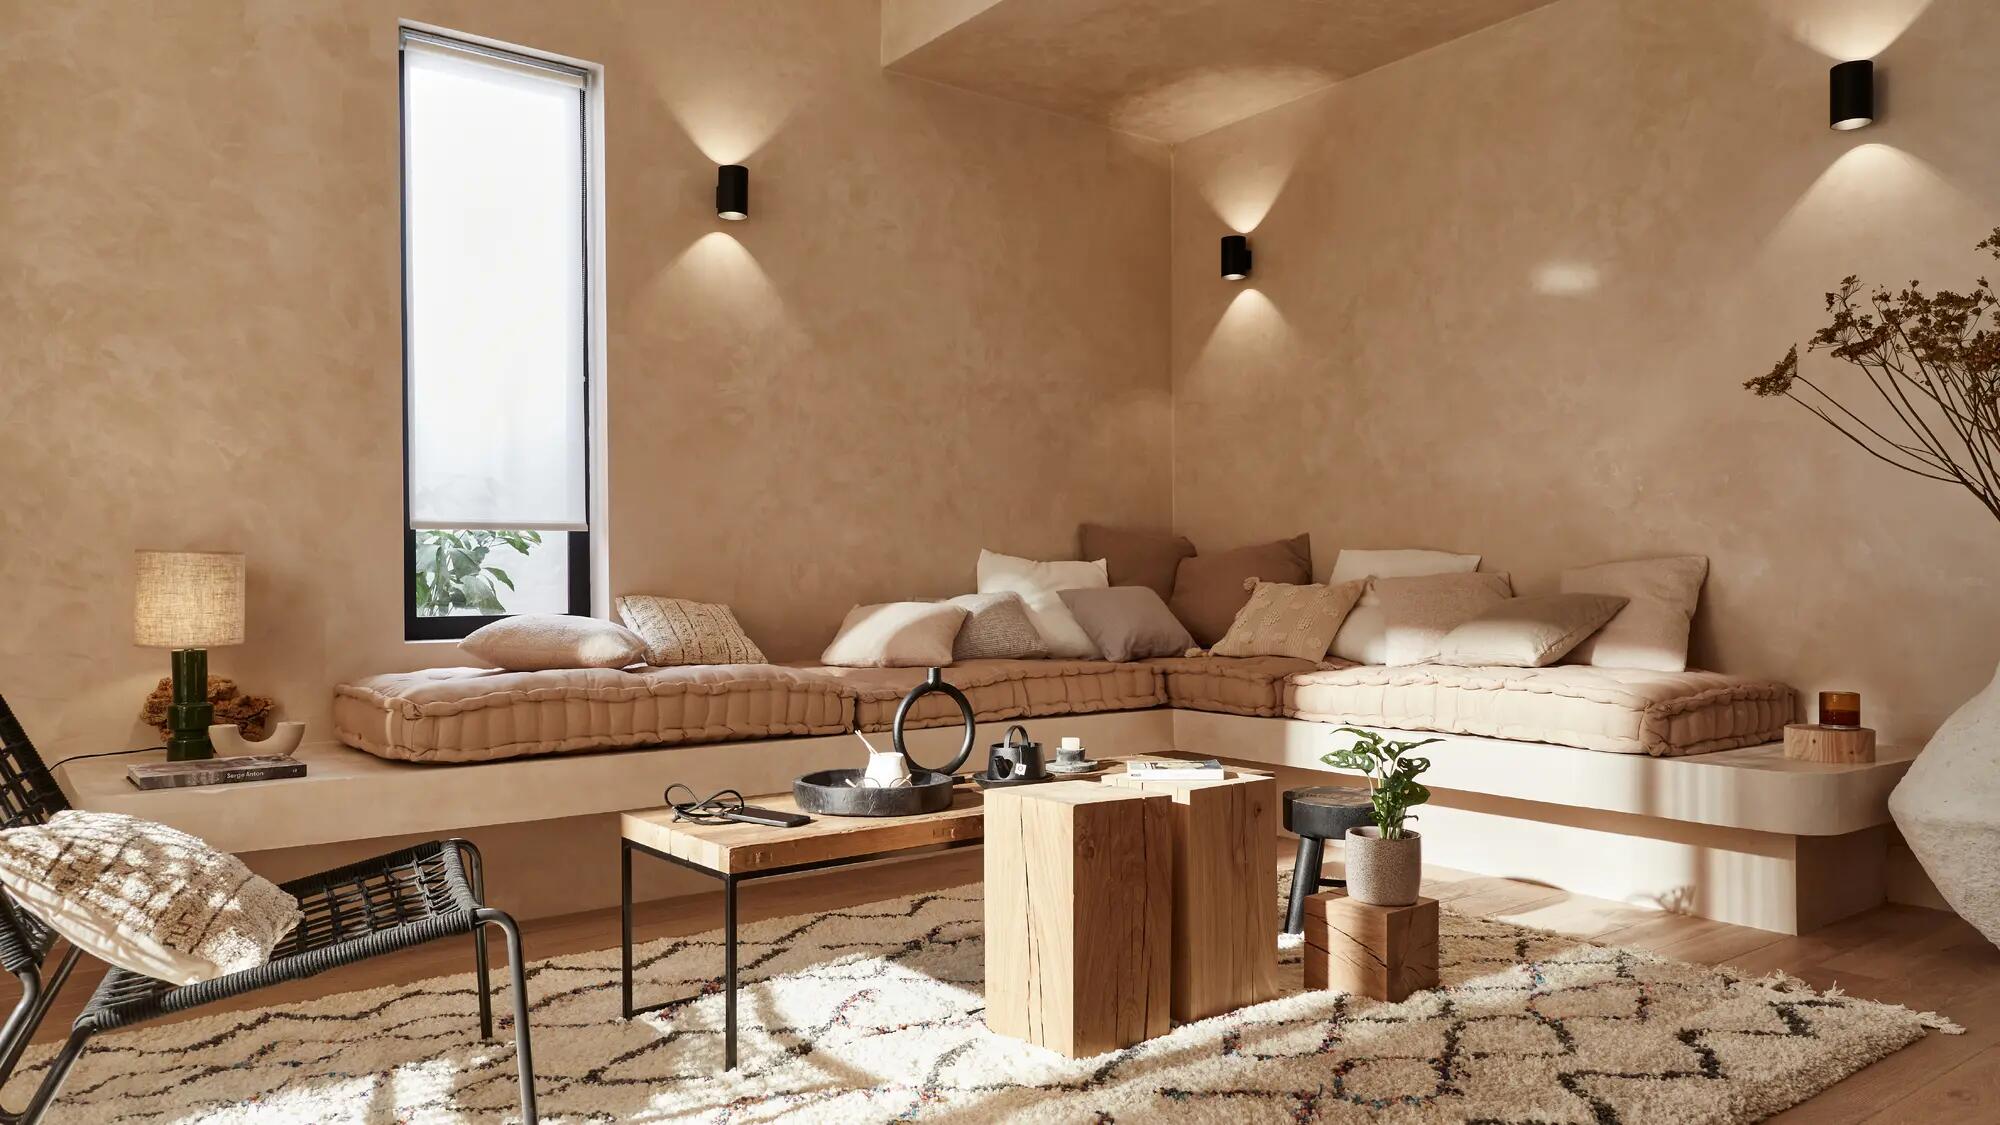 Comment on peut créer une chambre cocooning?  Home decor trends, Home  decor, Chic living room